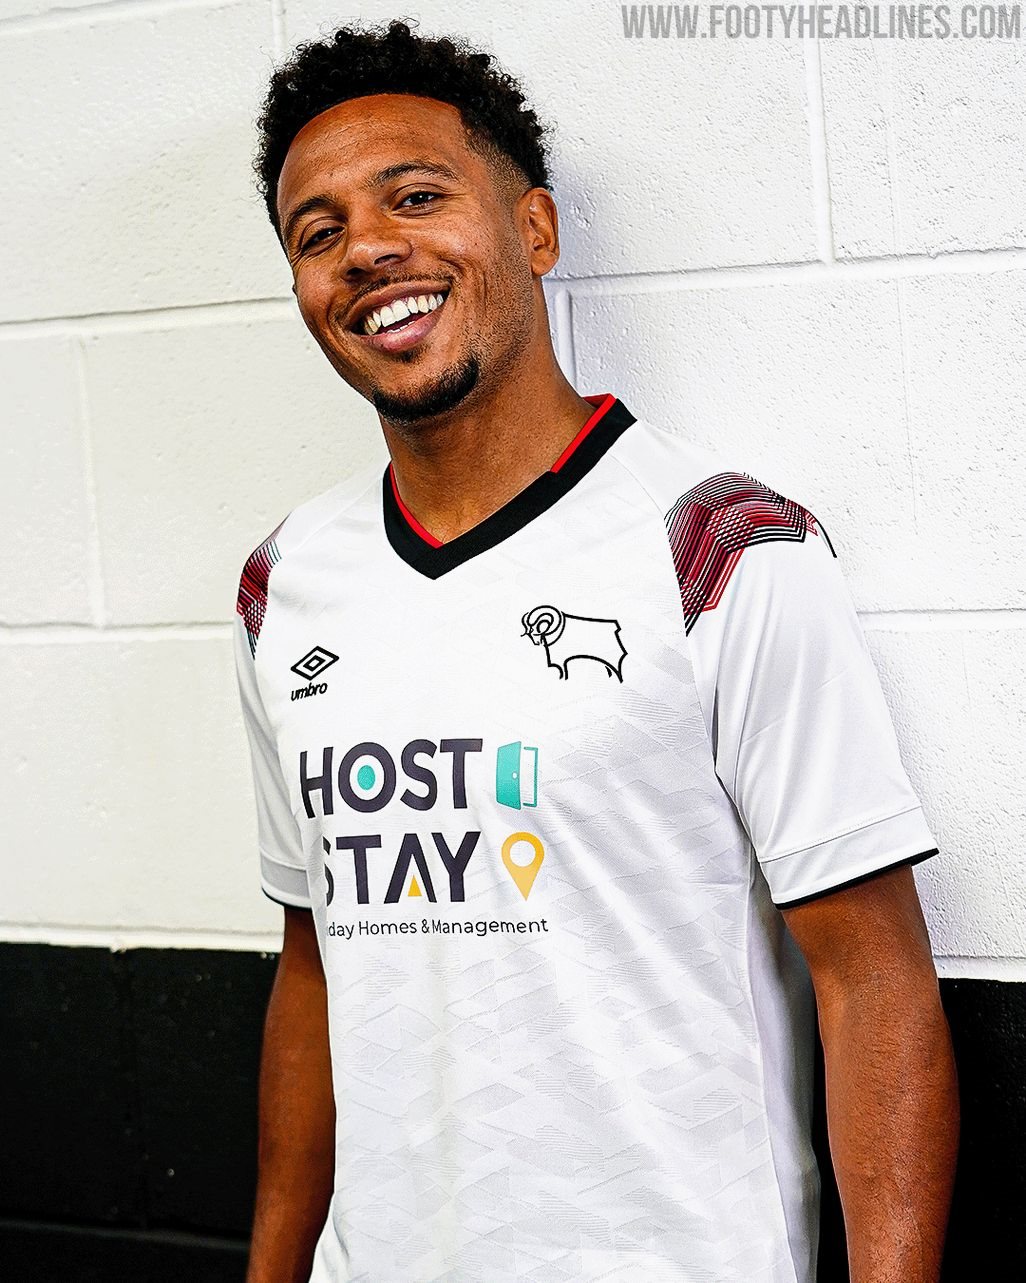 Derby County 23-24 Home Kit Released - Footy Headlines